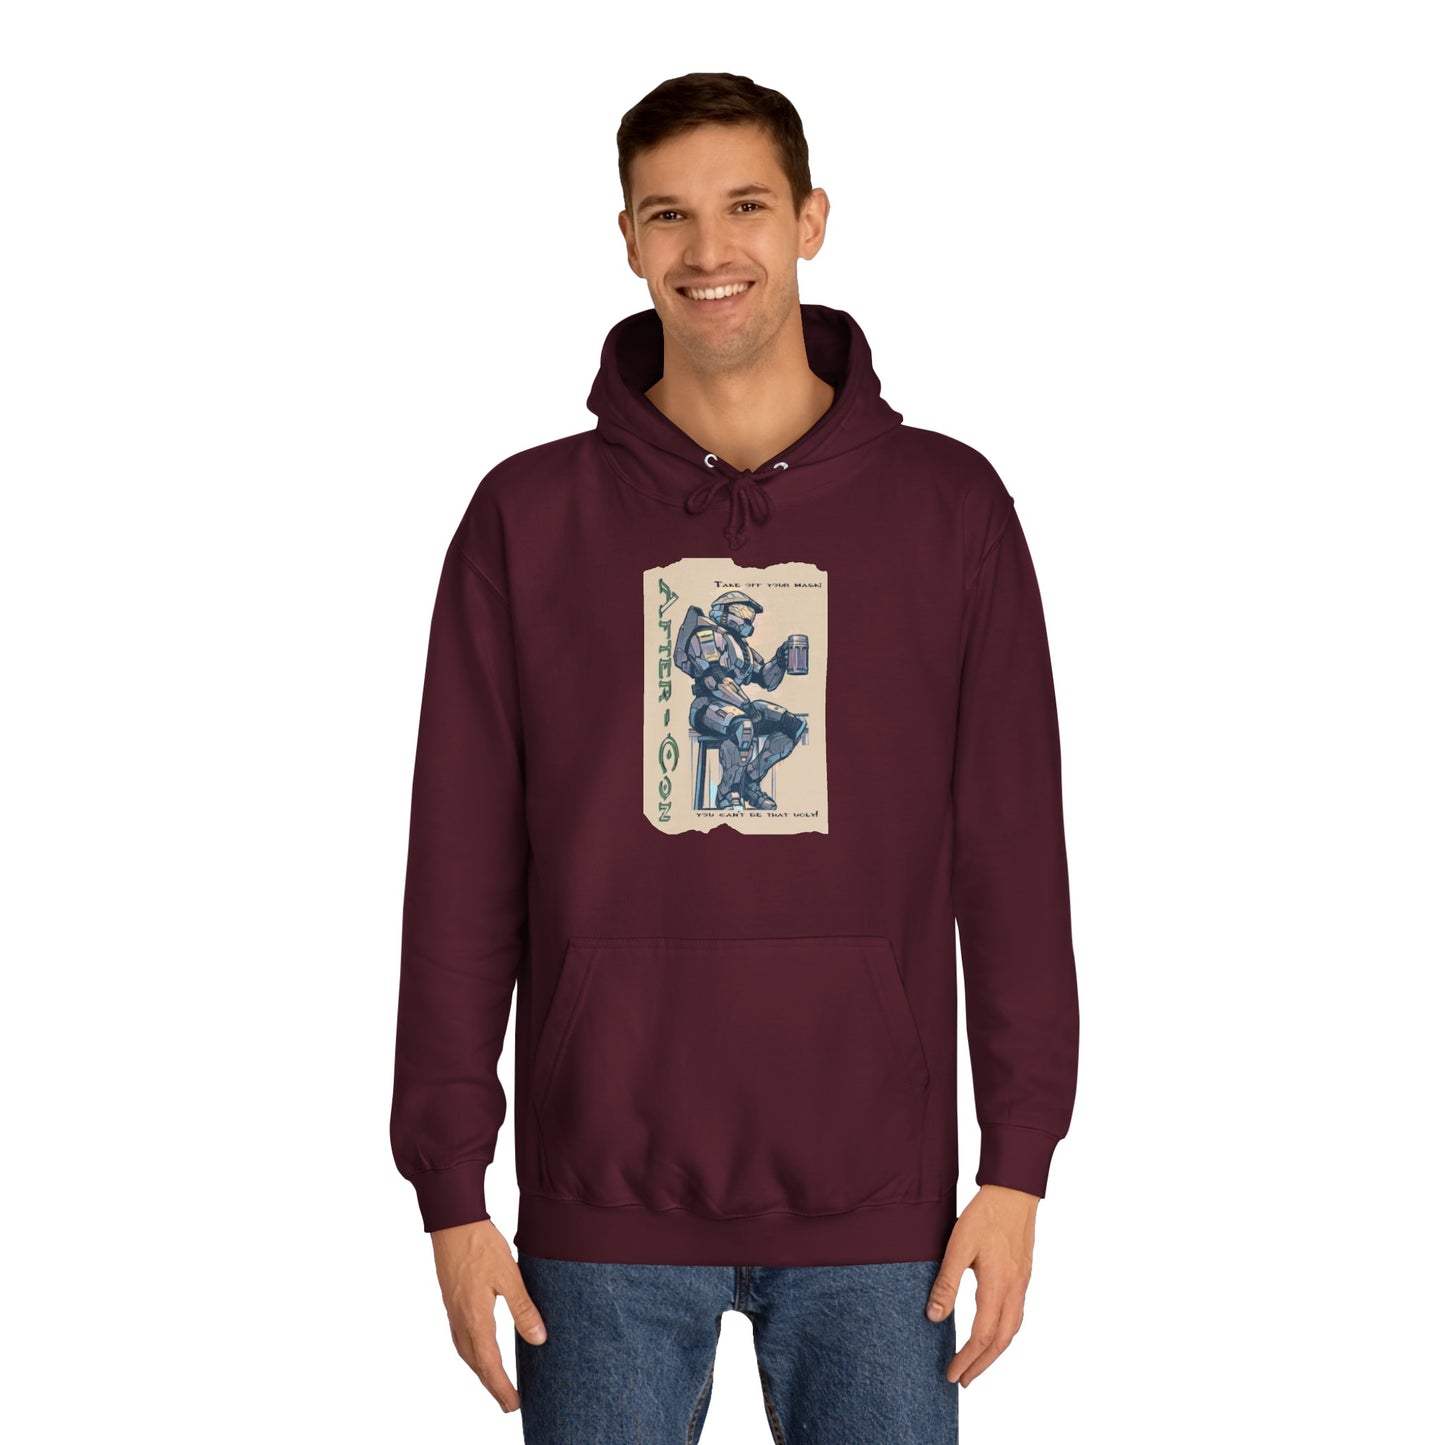 After-Con "Take Off Your Mask" Unisex College Hoodie